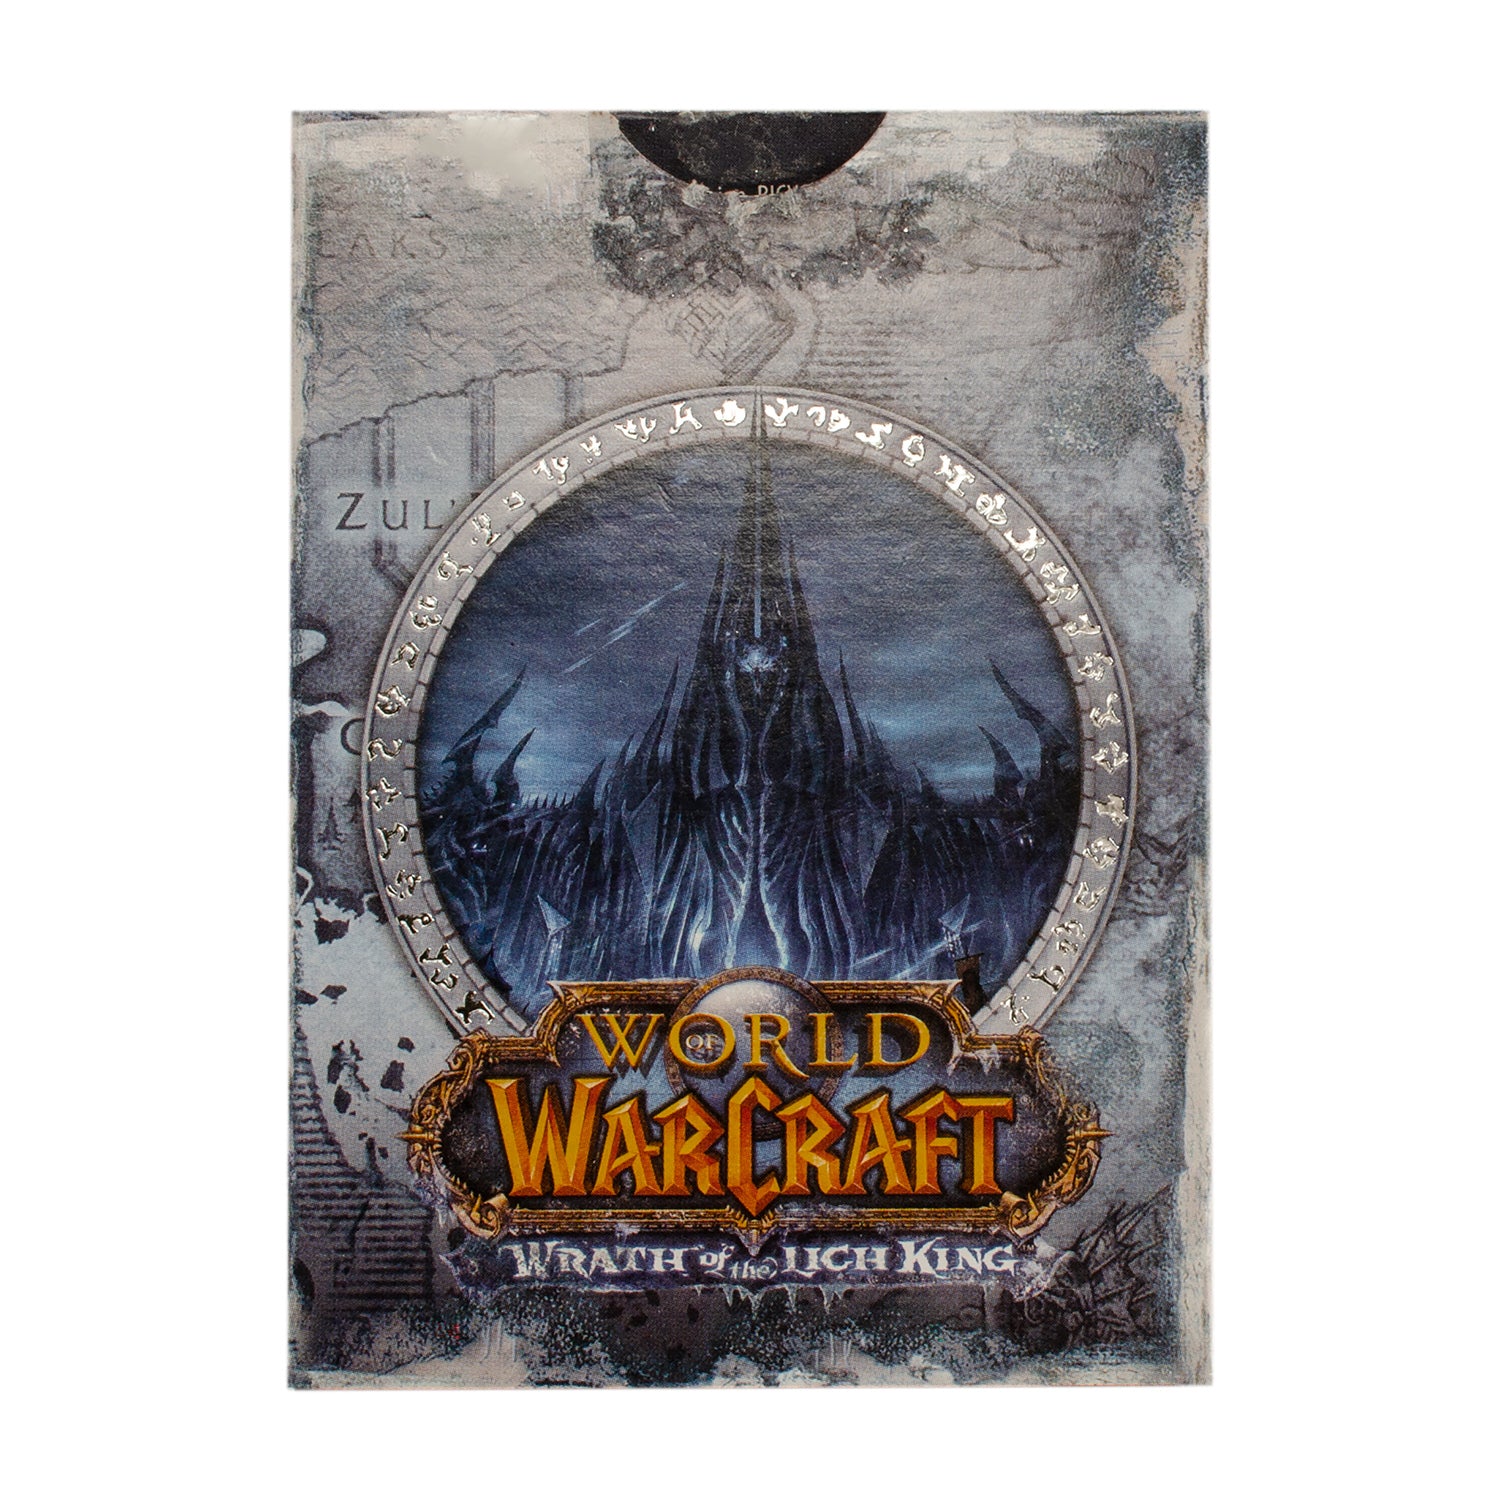 World of Warcraft Wrath of the Lich King Bicycle Card Deck - Back View of Packaging